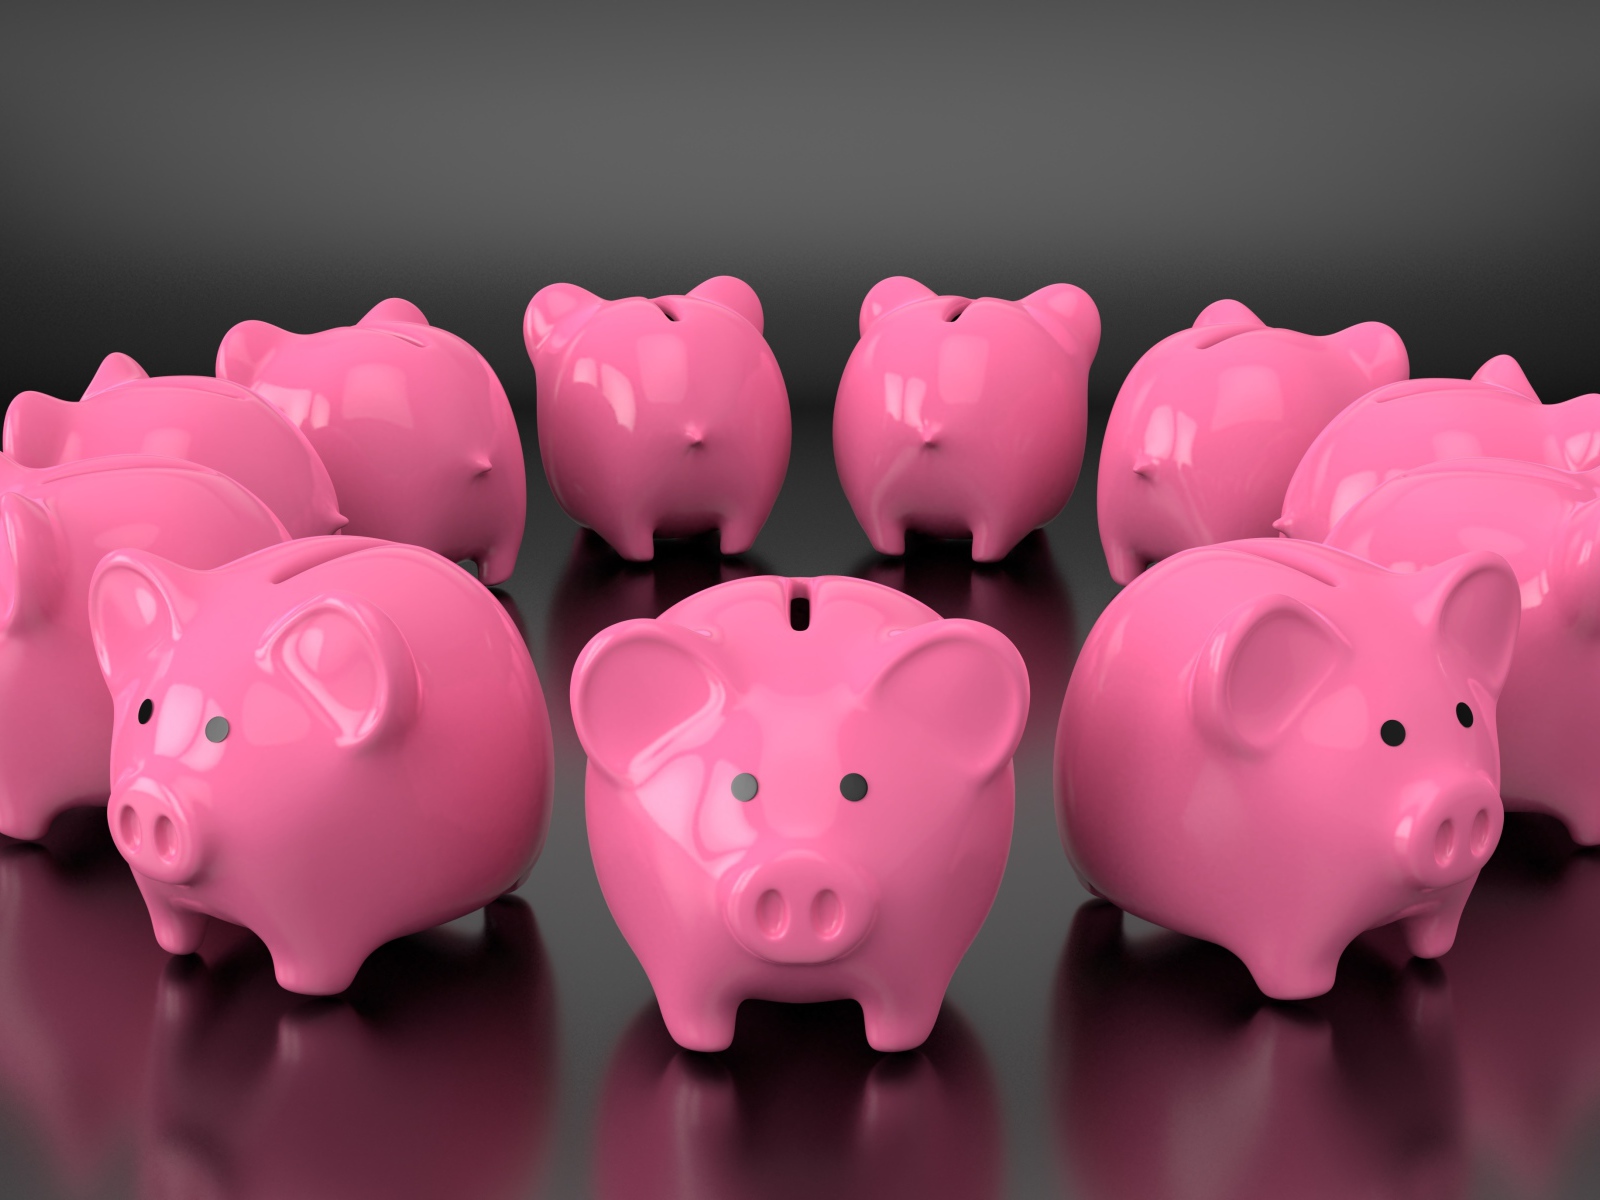 Lots of pink pigs piggy banks on gray background